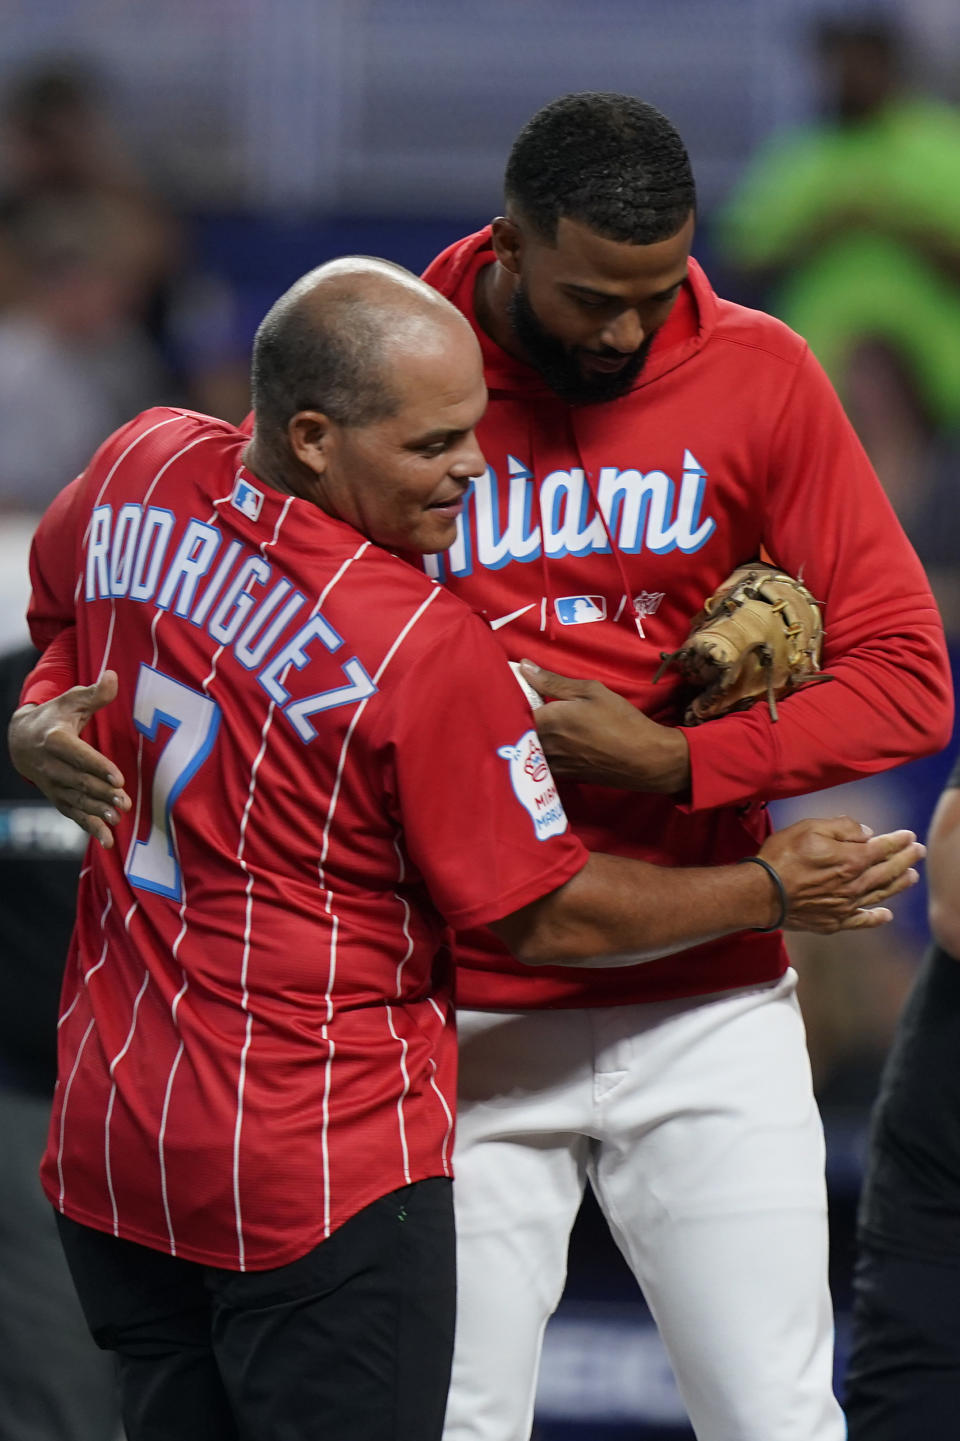 Baseball Hall of Famer Ivan "Pudge" Rodriguez, foreground, hugs Miami Marlins pitcher Sandy Alcantara after Rodriguez threw out a ceremonial first pitch before the start of a baseball game between the Marlins and the New York Mets, Saturday, July 30, 2022, in Miami. (AP Photo/Wilfredo Lee)